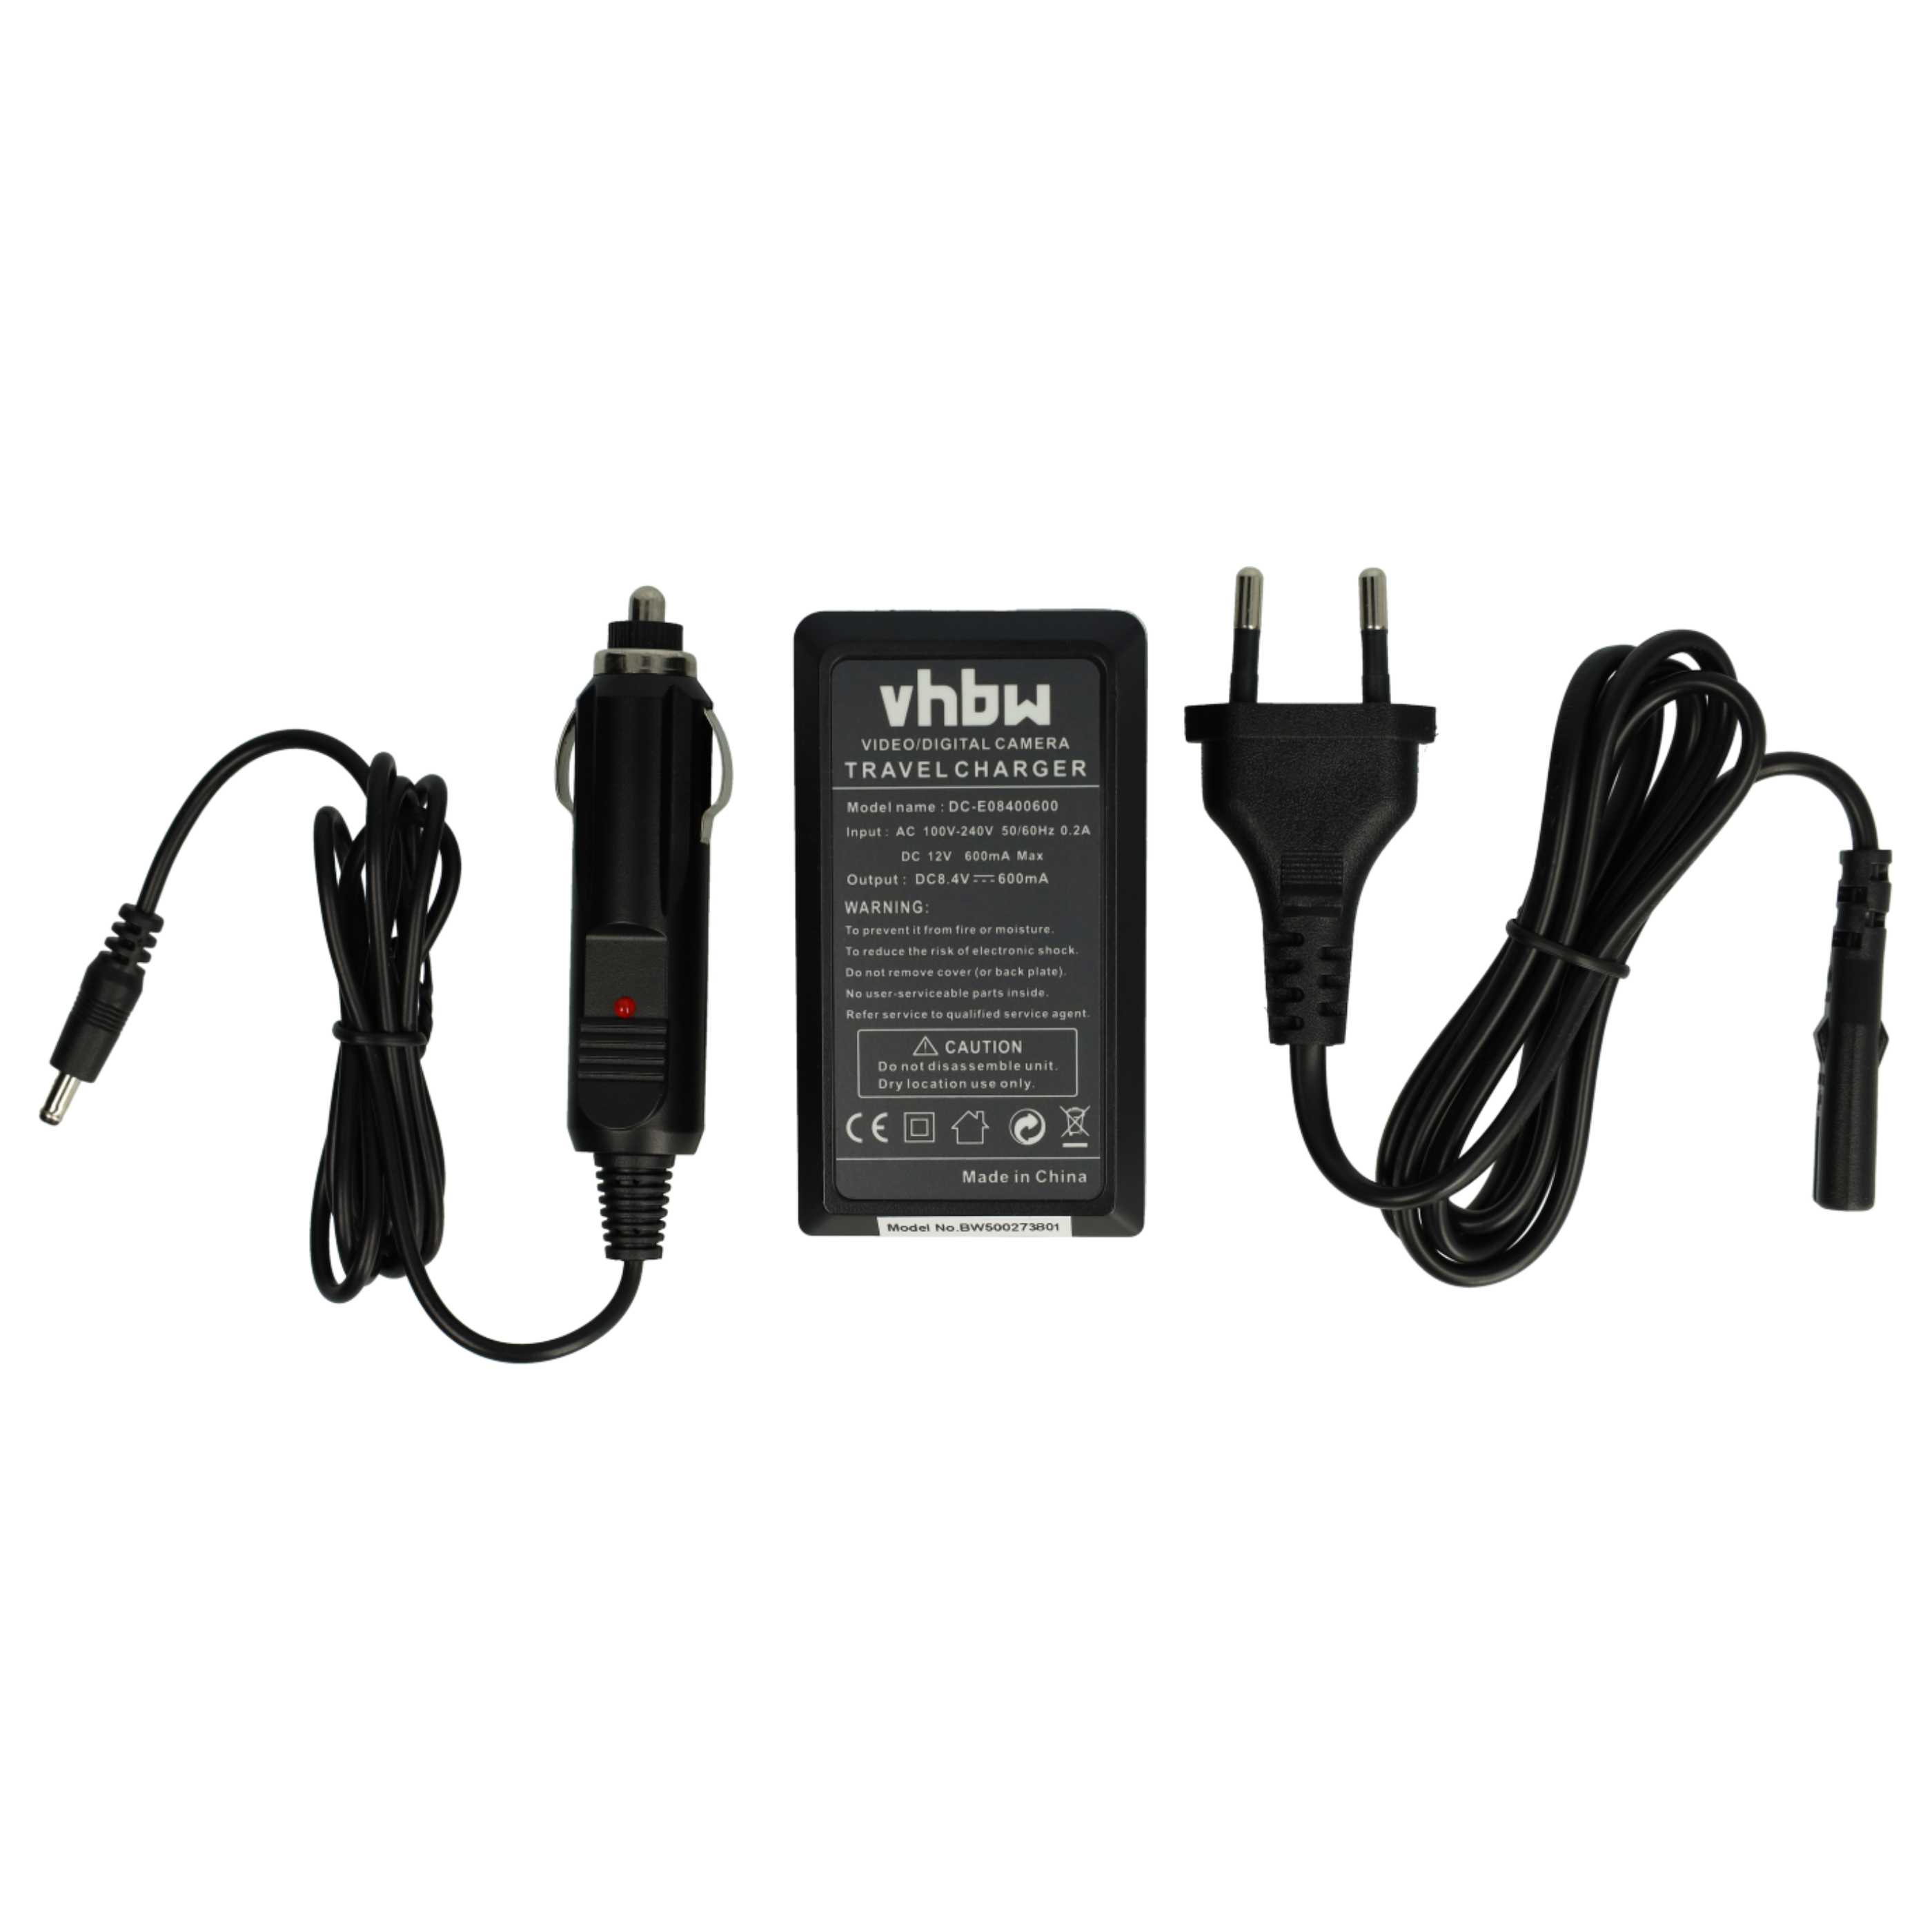 Battery Charger suitable for Lumix DMC-FZ1 Camera etc. - 0.6 A, 8.4 V